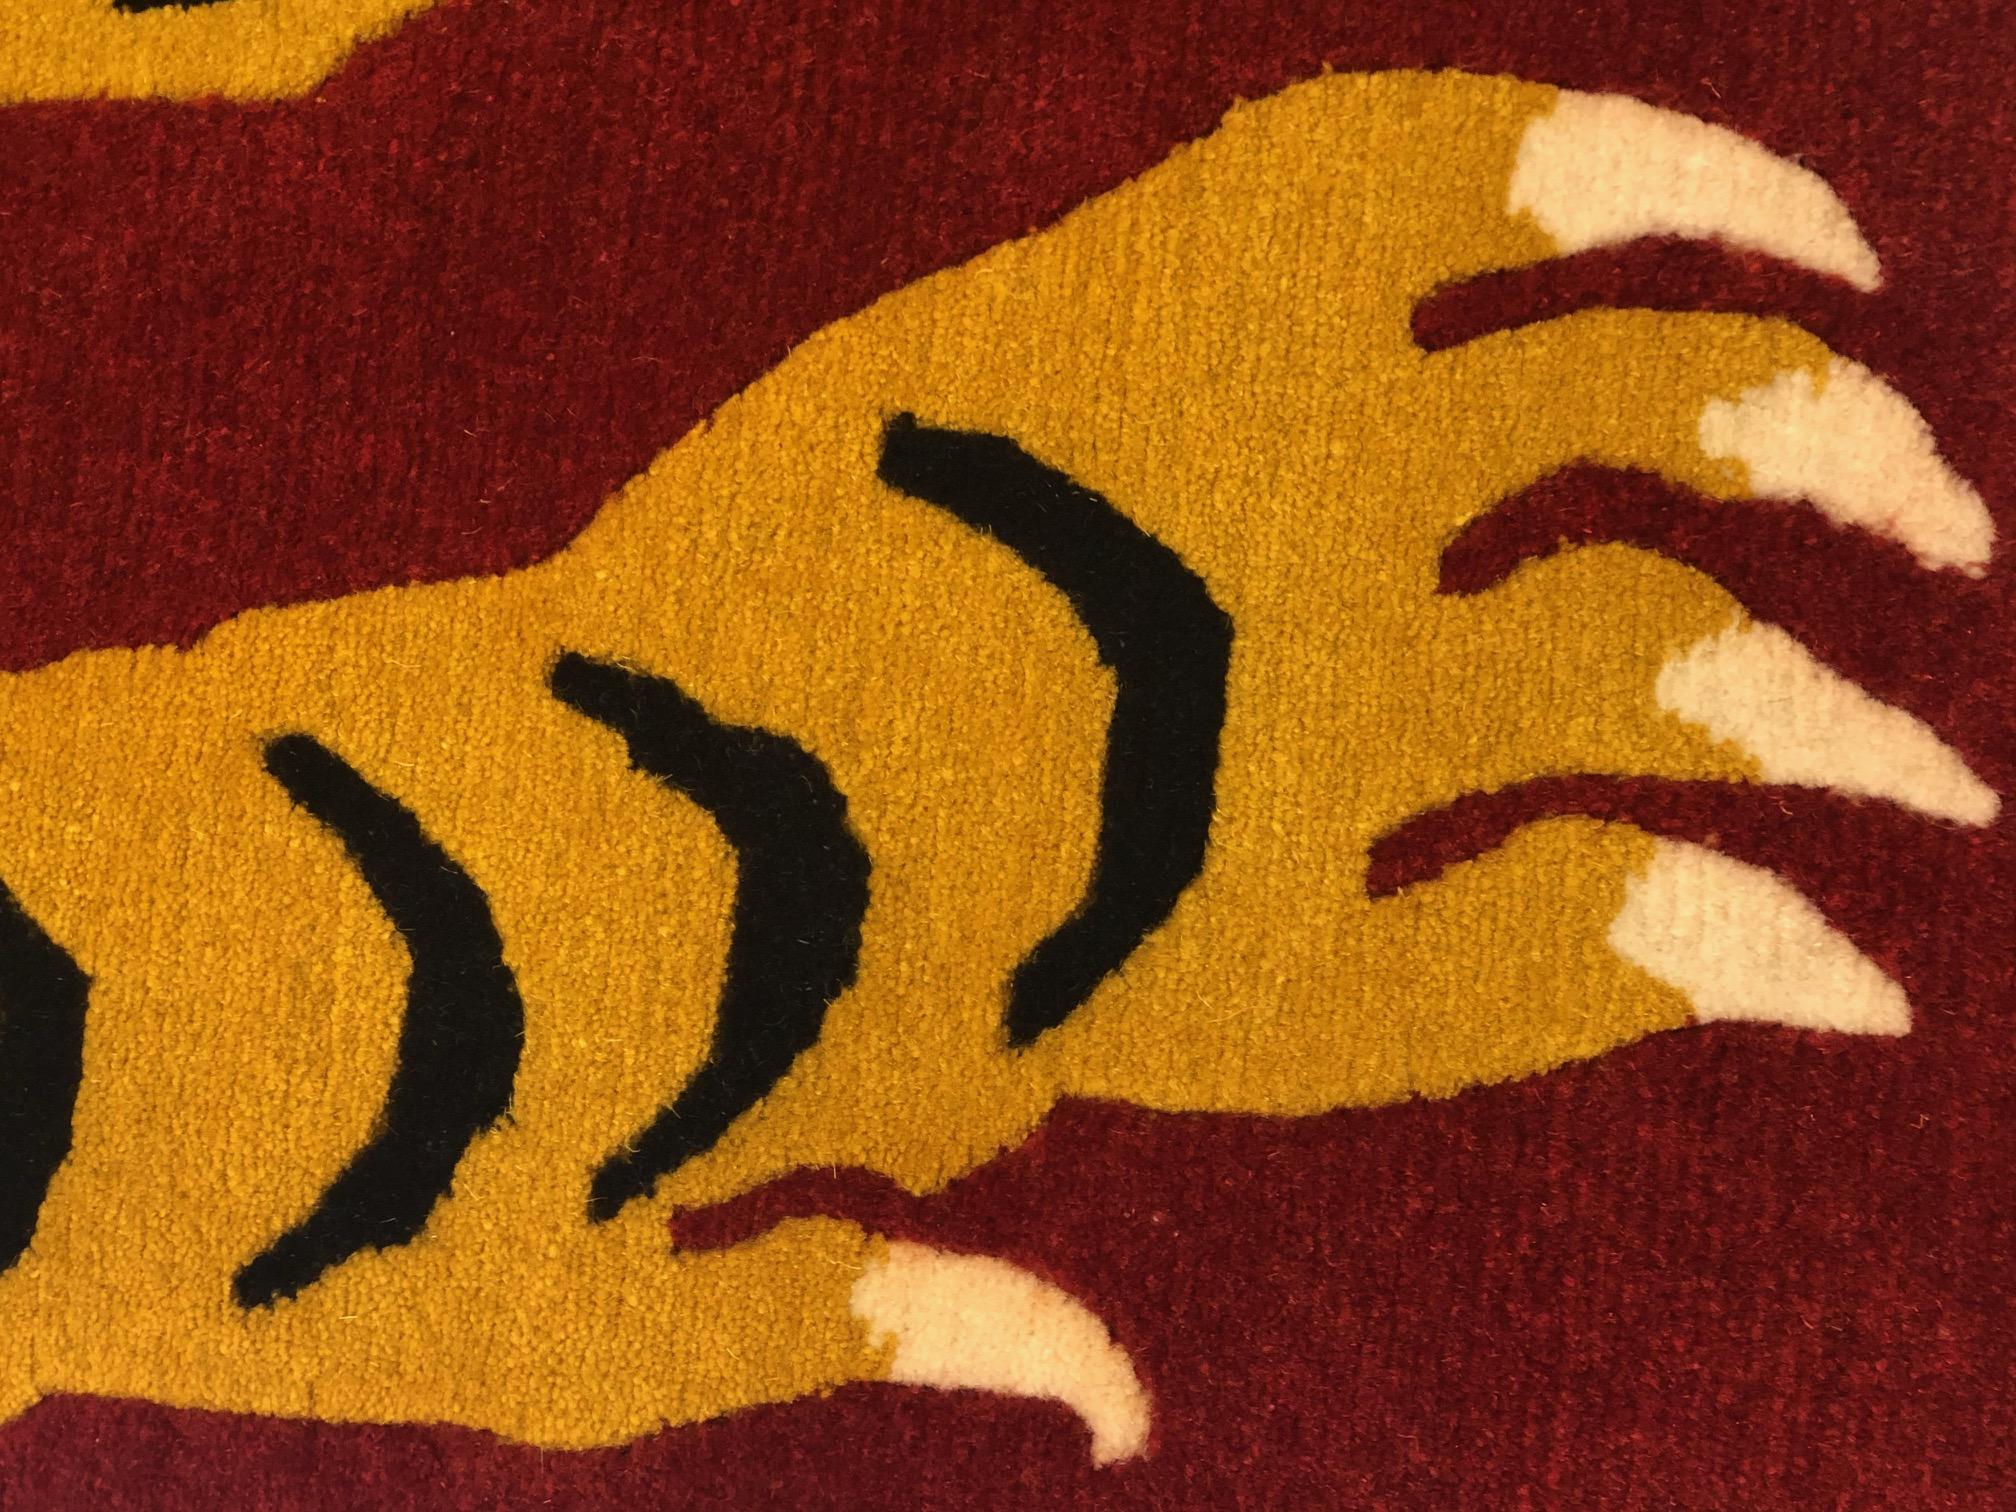 21st Century Red and Yellow Tiger Tibetan Rug Prayer, 2019 (Wolle)